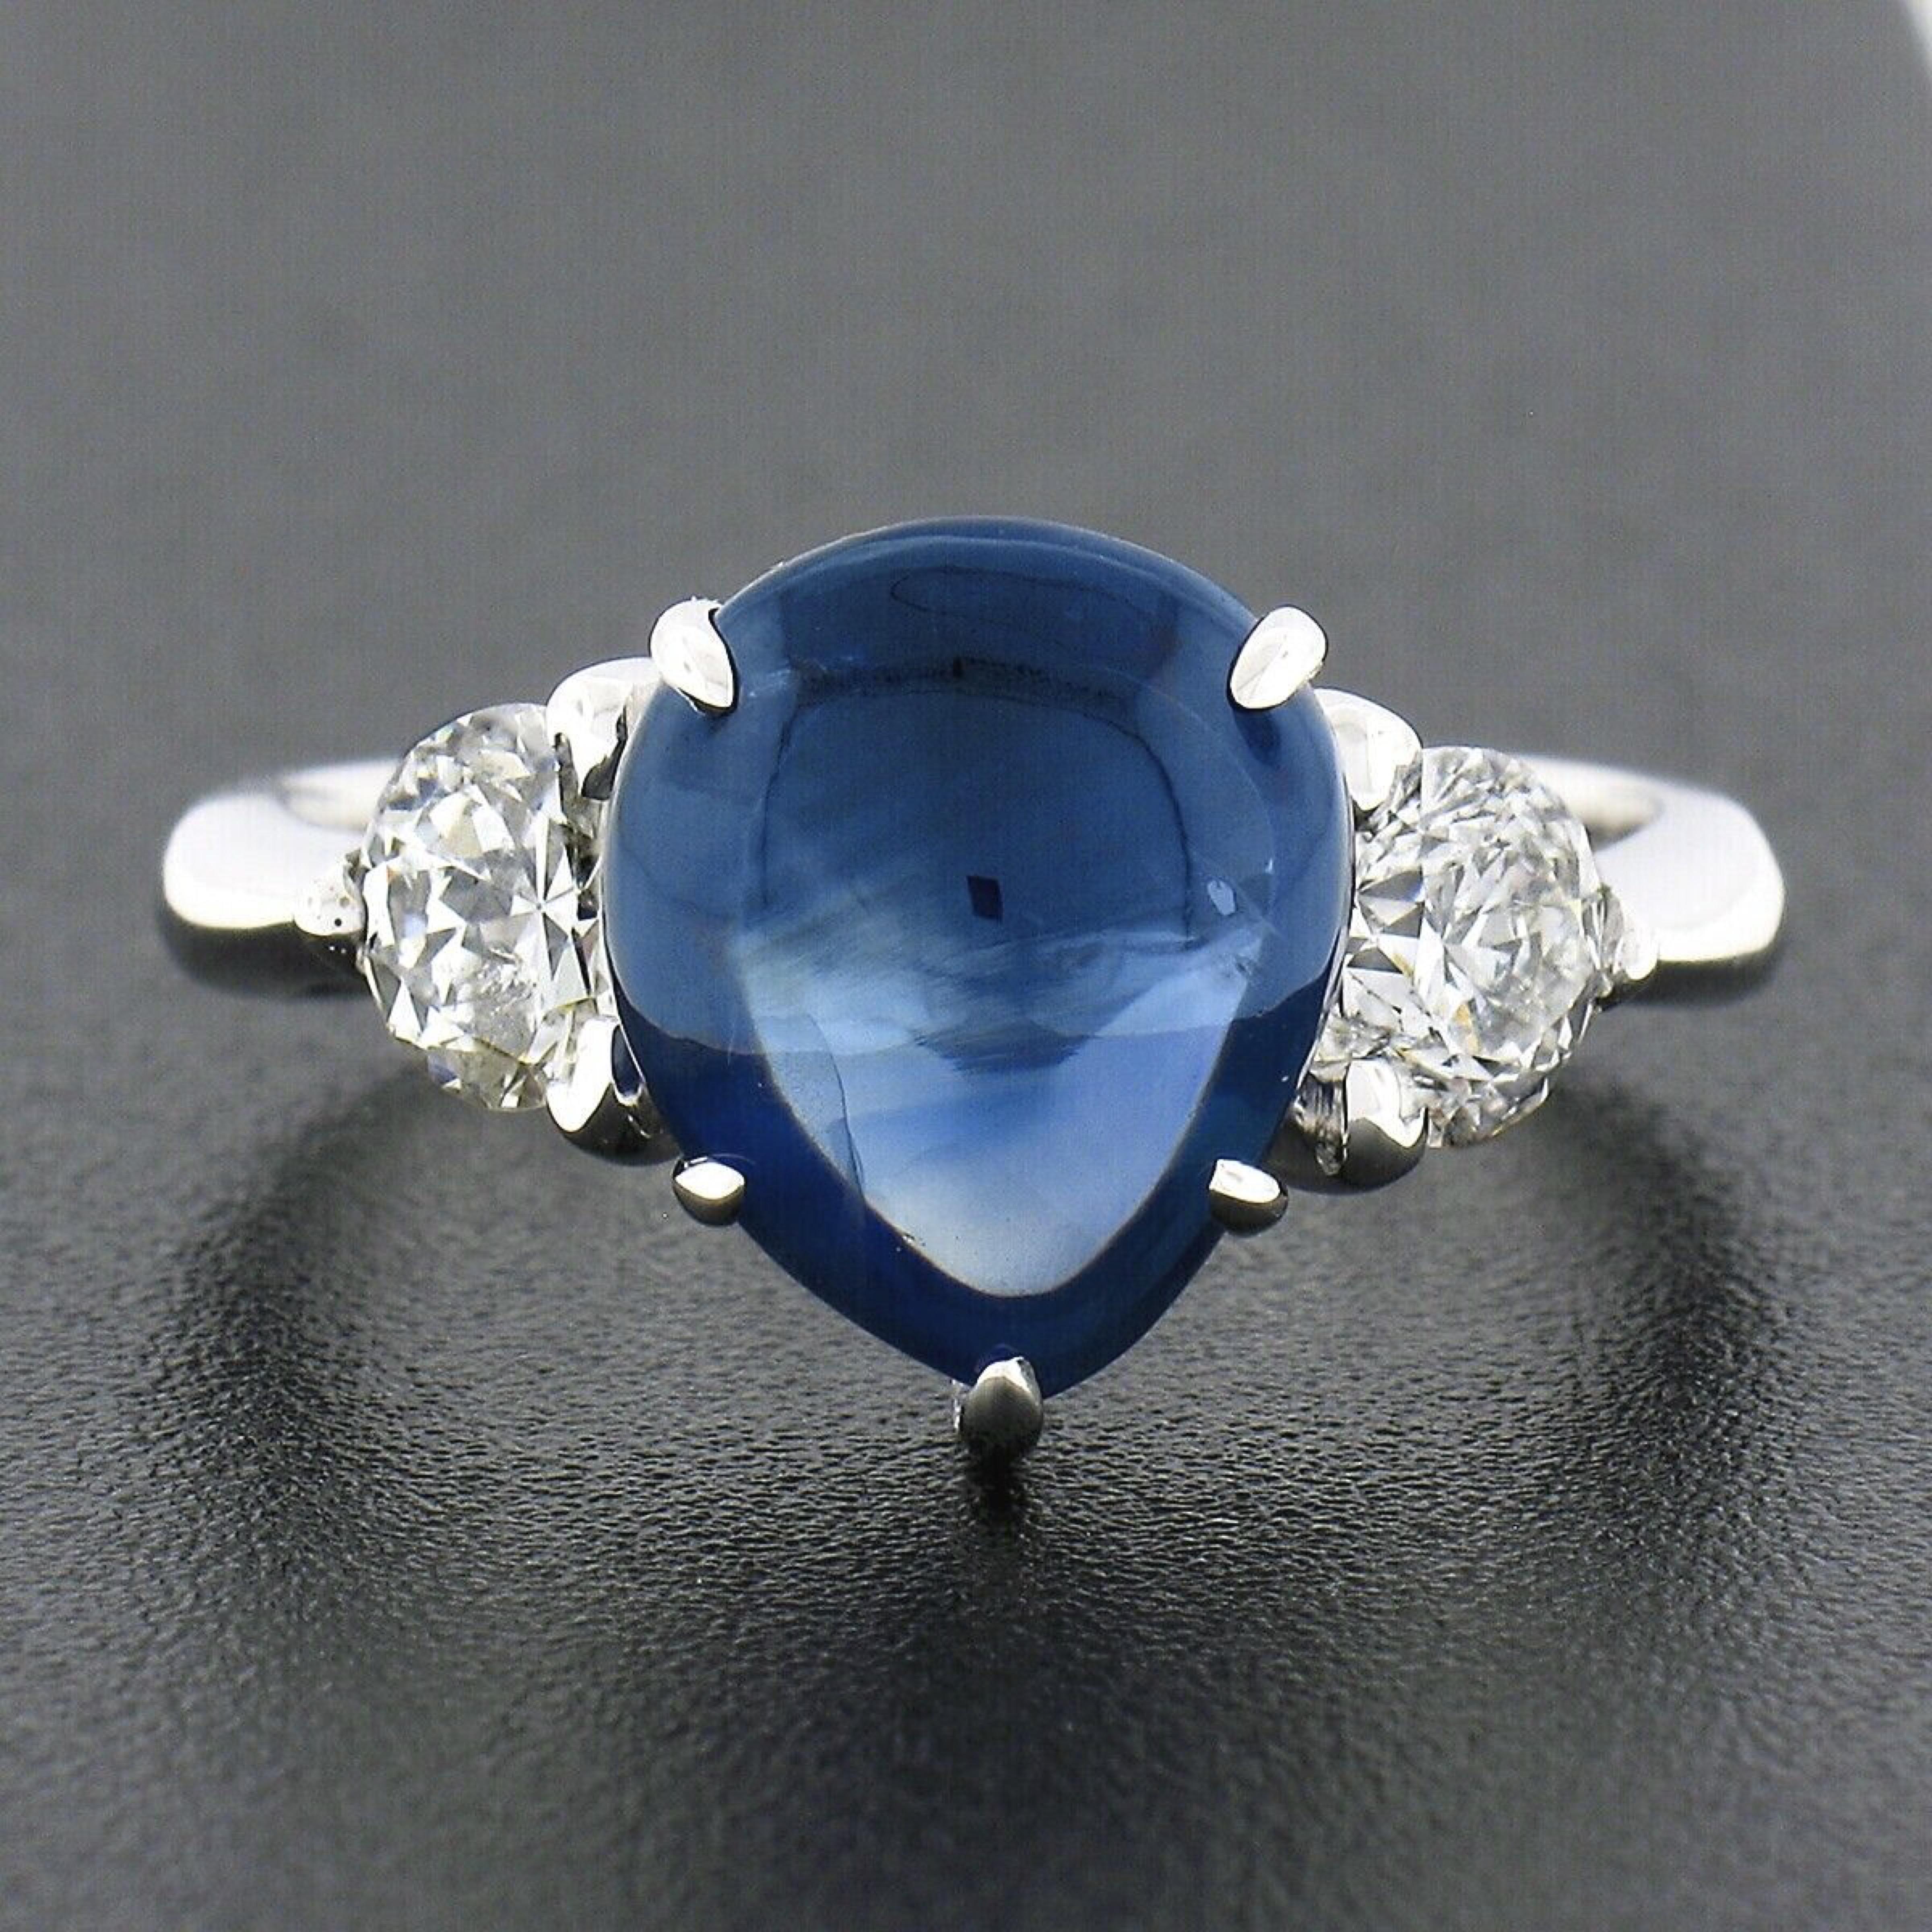 You are looking at a truly unusual and fabulous looking sapphire and diamond three stone engagement ring that is crafted in solid 14k white gold. The ring features a gorgeous, GIA certified, pear cabochon cut sapphire solitaire neatly prong set in